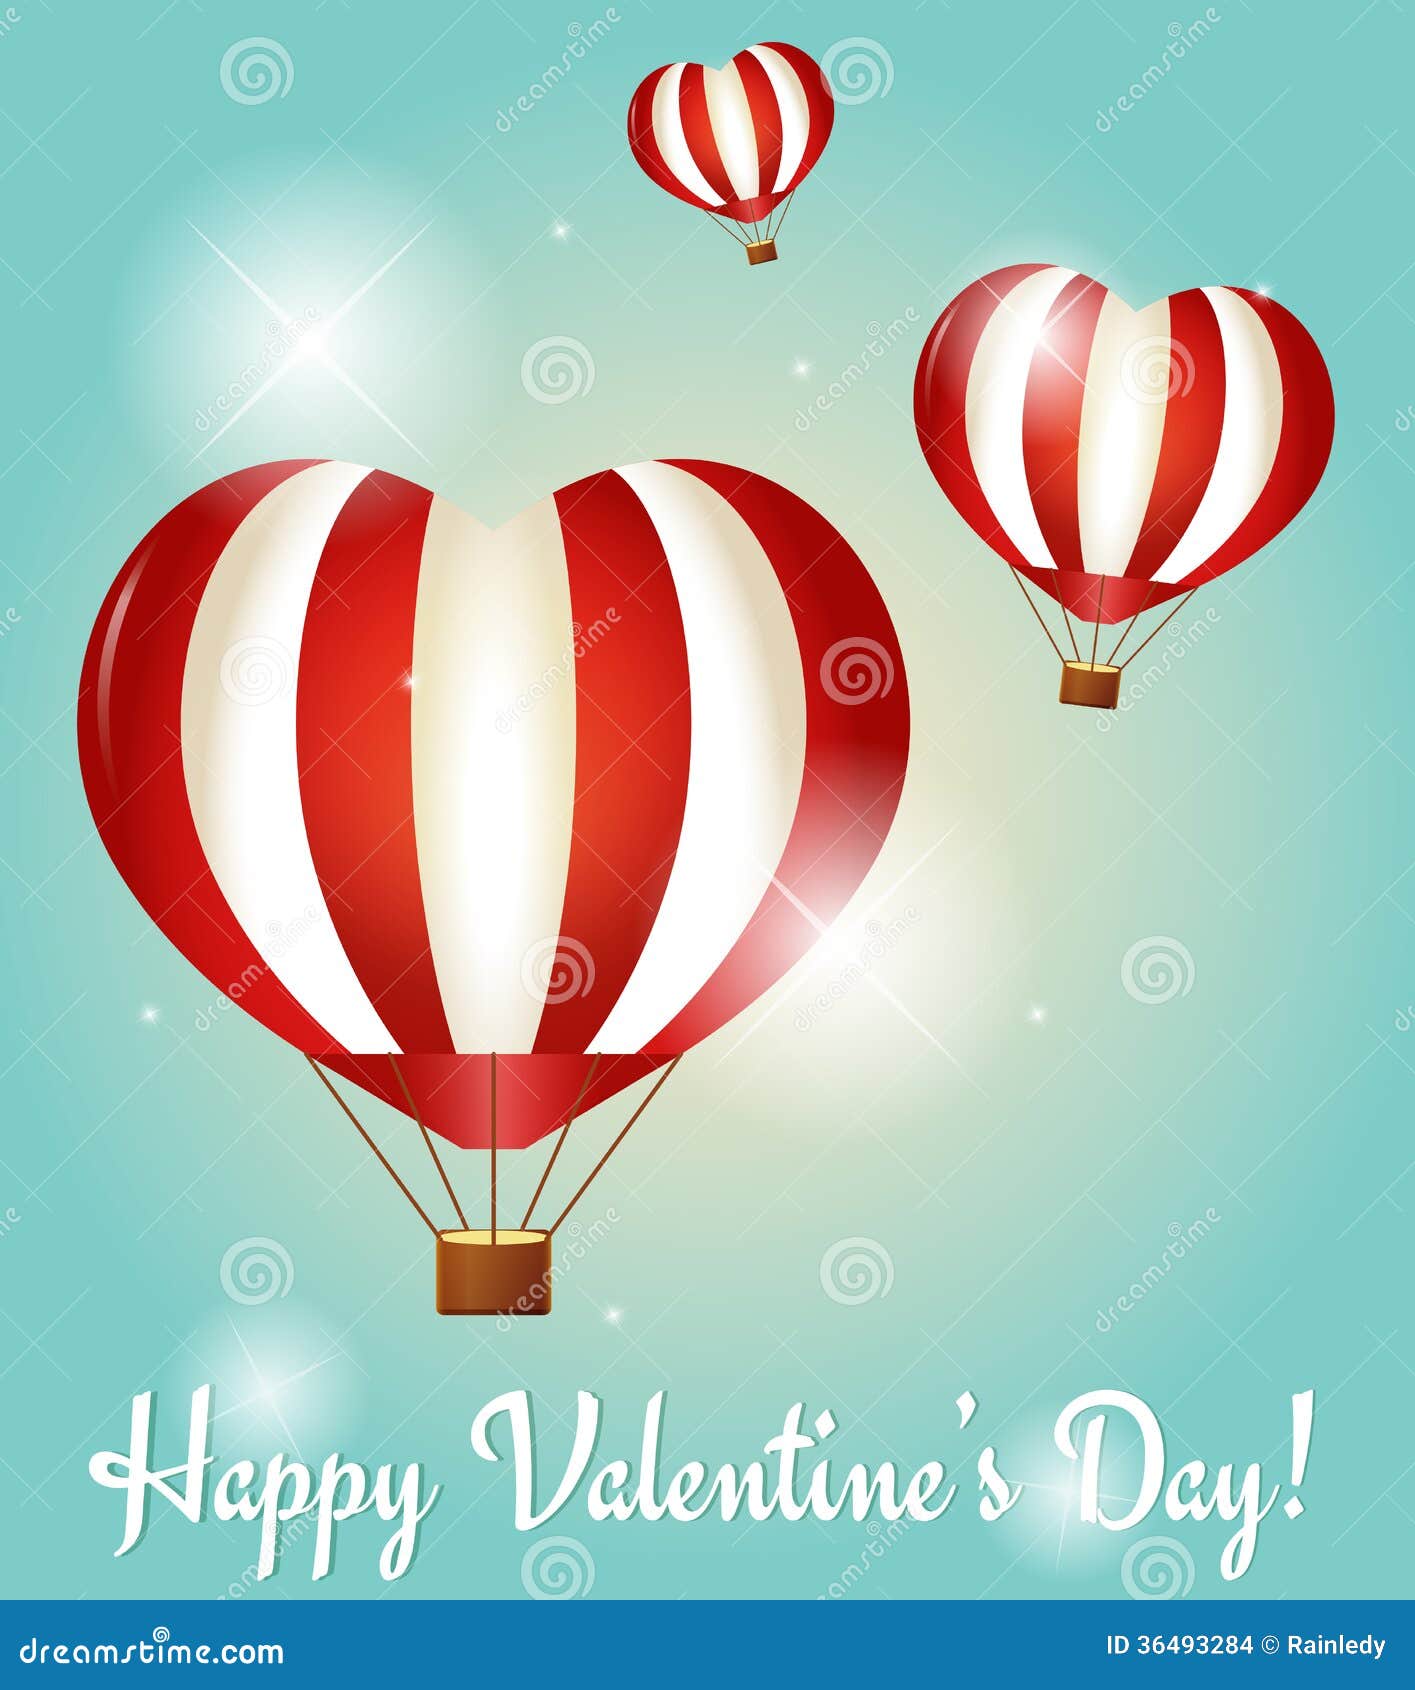 Valentines Day greeting cards. Vector illustration. Valentines Day greeting cards with three heart shaped hot air balloons. Vector illustration.